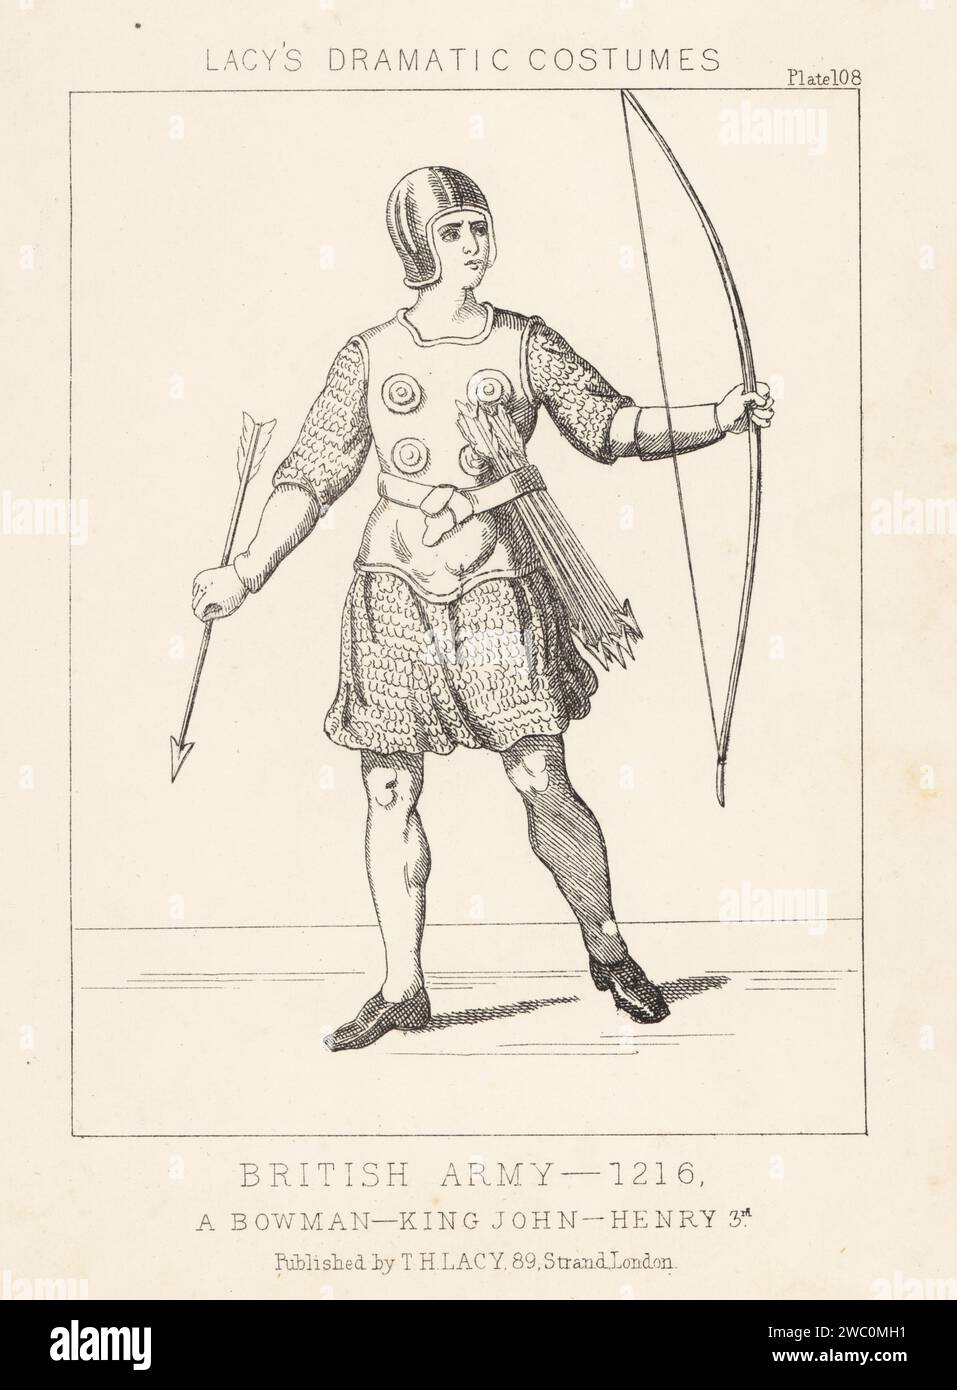 A bowman with the English Army, era of King John and King Henry III, 13th century. In helmet, jerkin, chainmail hauberk, armed with long bow, a dozen arrows in his belt. Lithograph from Thomas Hailes Lacy's Male Costumes, Historical, National and Dramatic in 200 Plates, London, 1865. Lacy (1809-1873) was a British actor, playwright, theatrical manager and publisher. Stock Photo